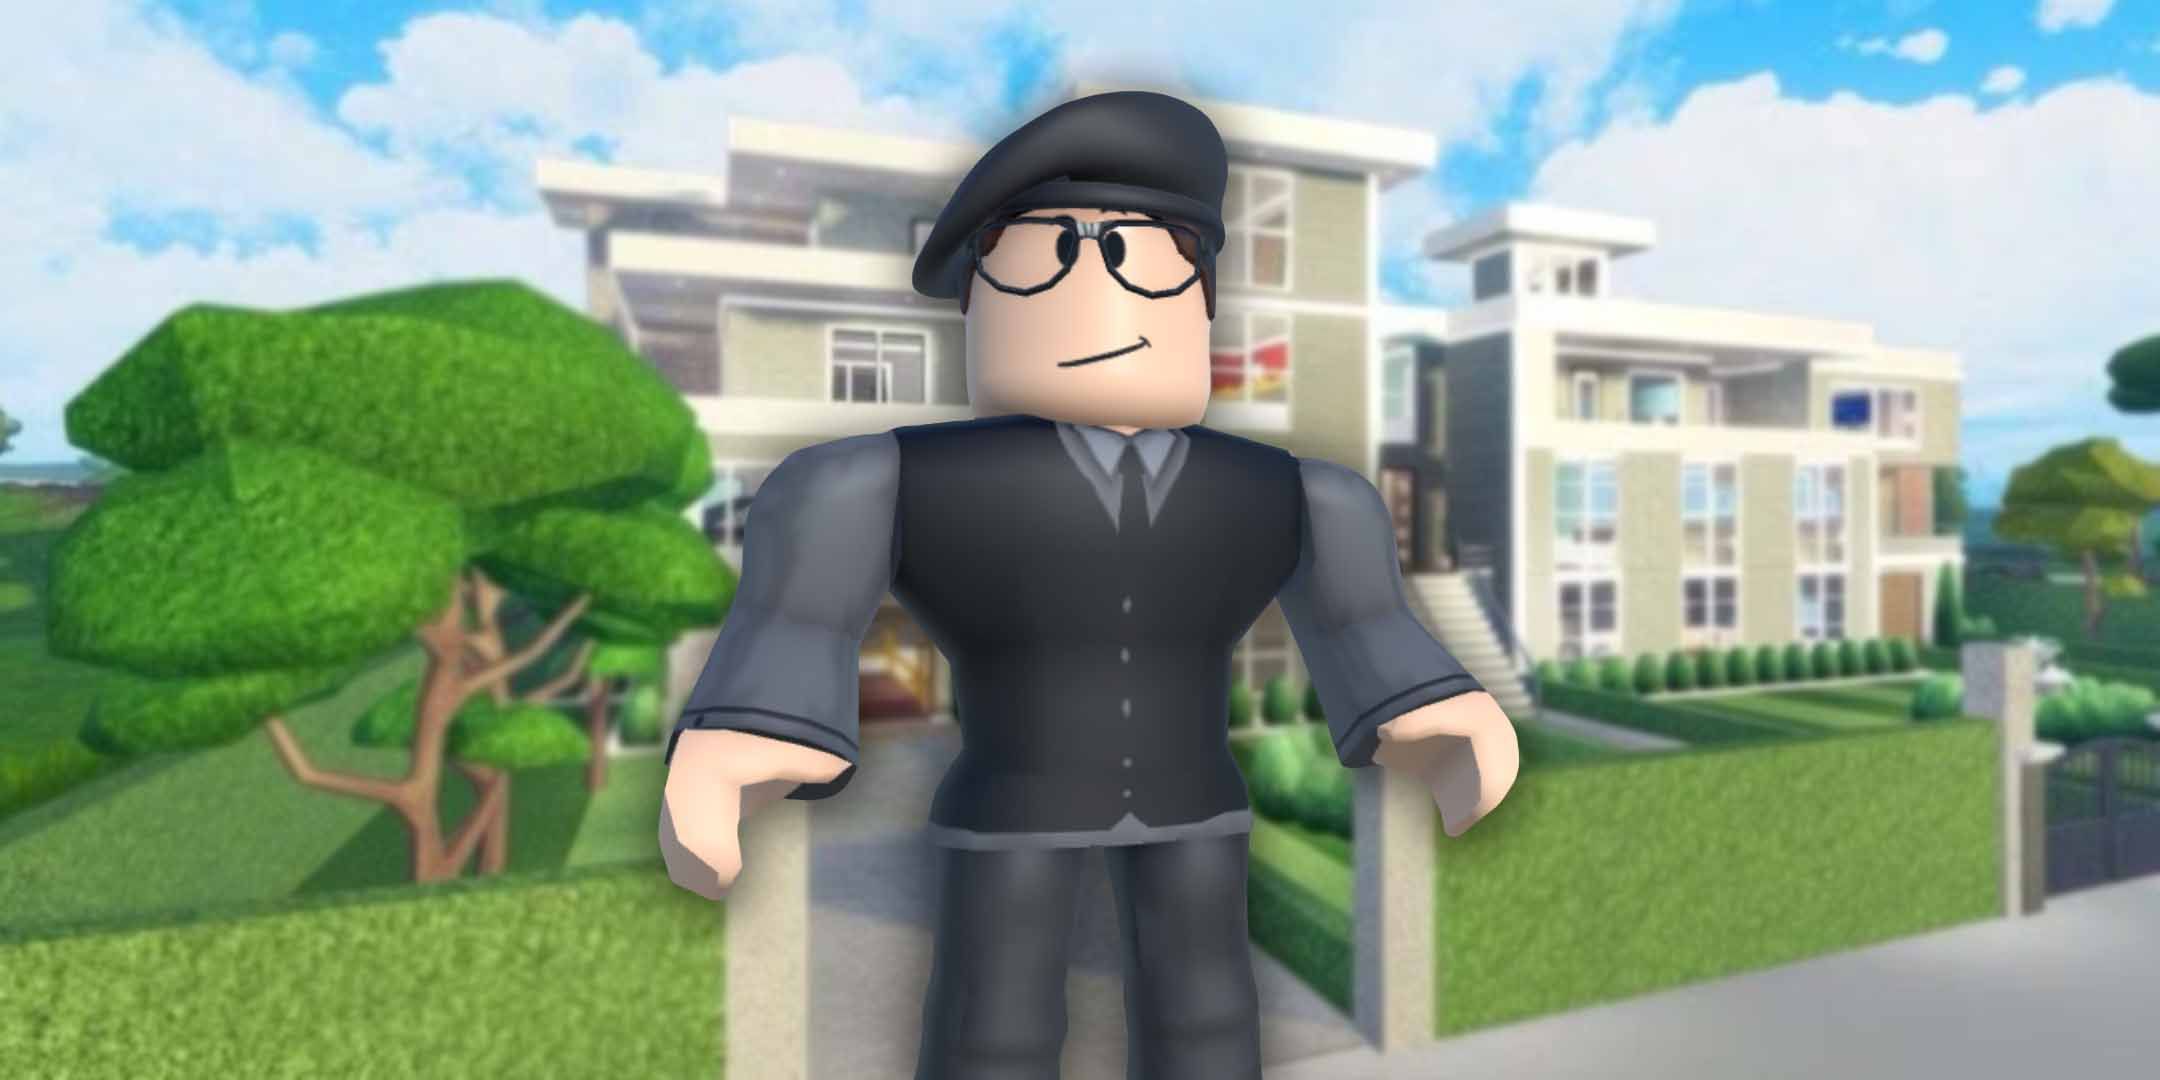 Roblox character standing in front of a house